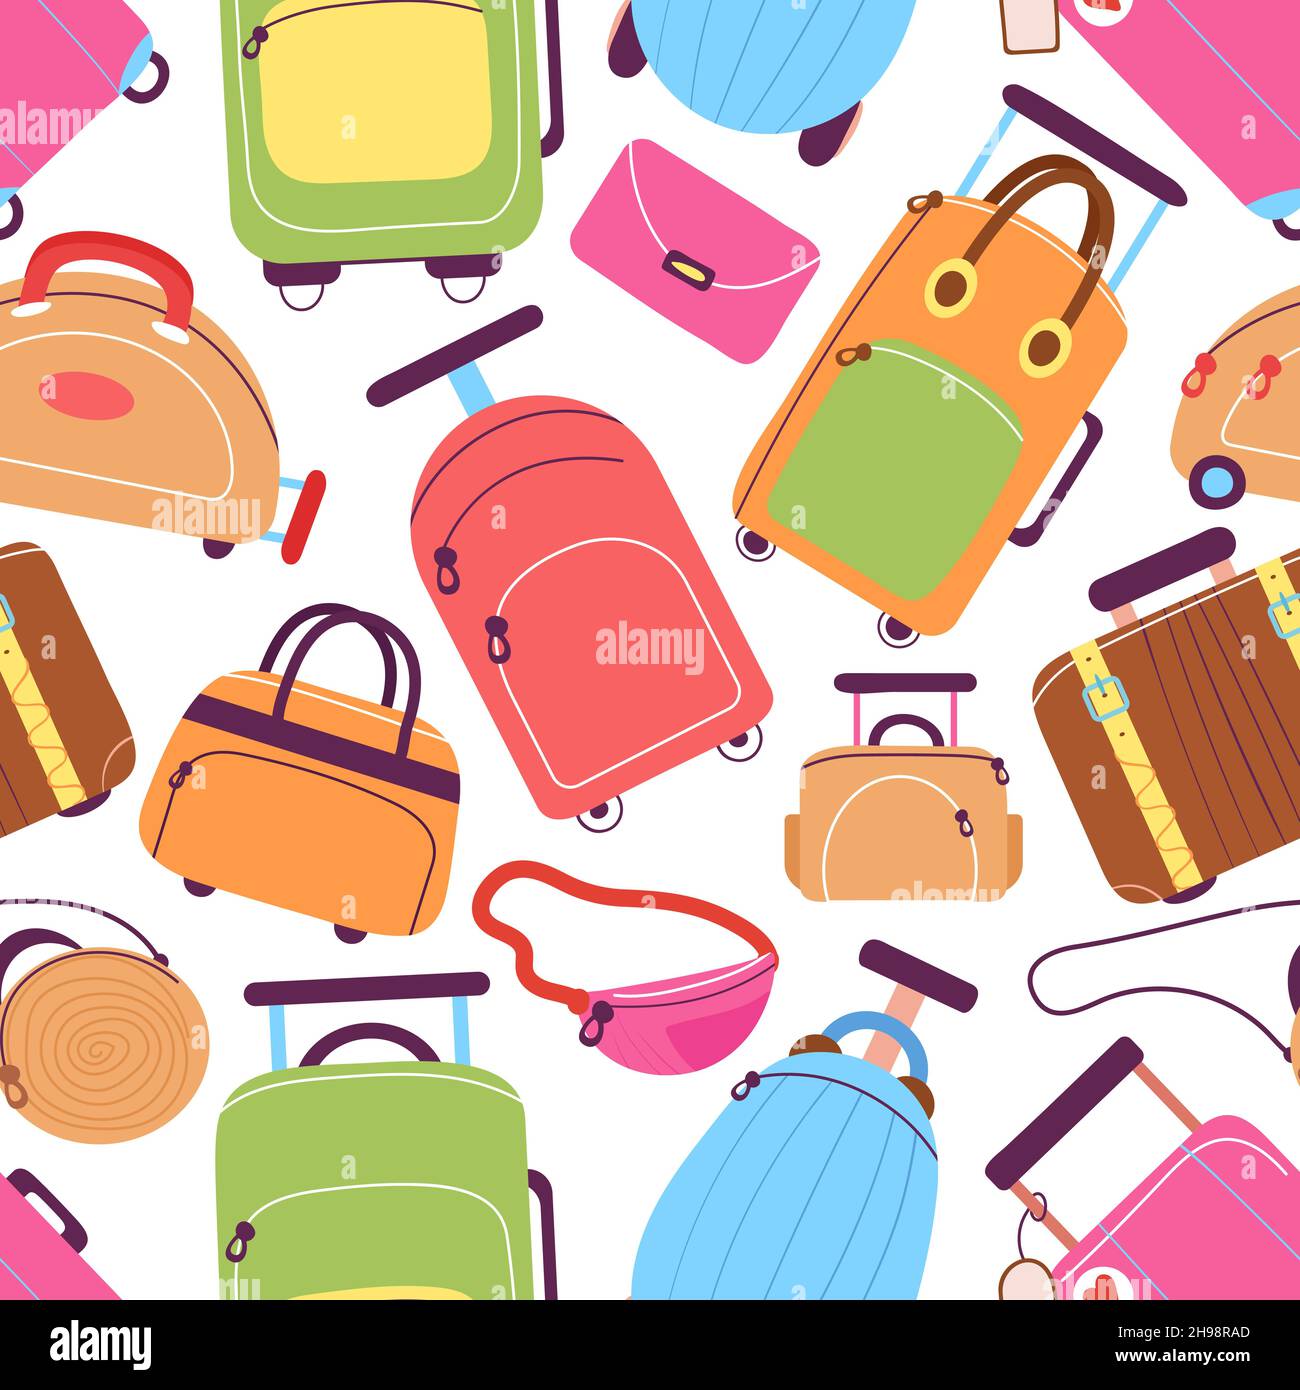 Doodle suitcases. Travel suitcase, luggage bags. Colorful female bag, vacation accessories. Cabin size baggage, tourism store decent vector seamless Stock Vector